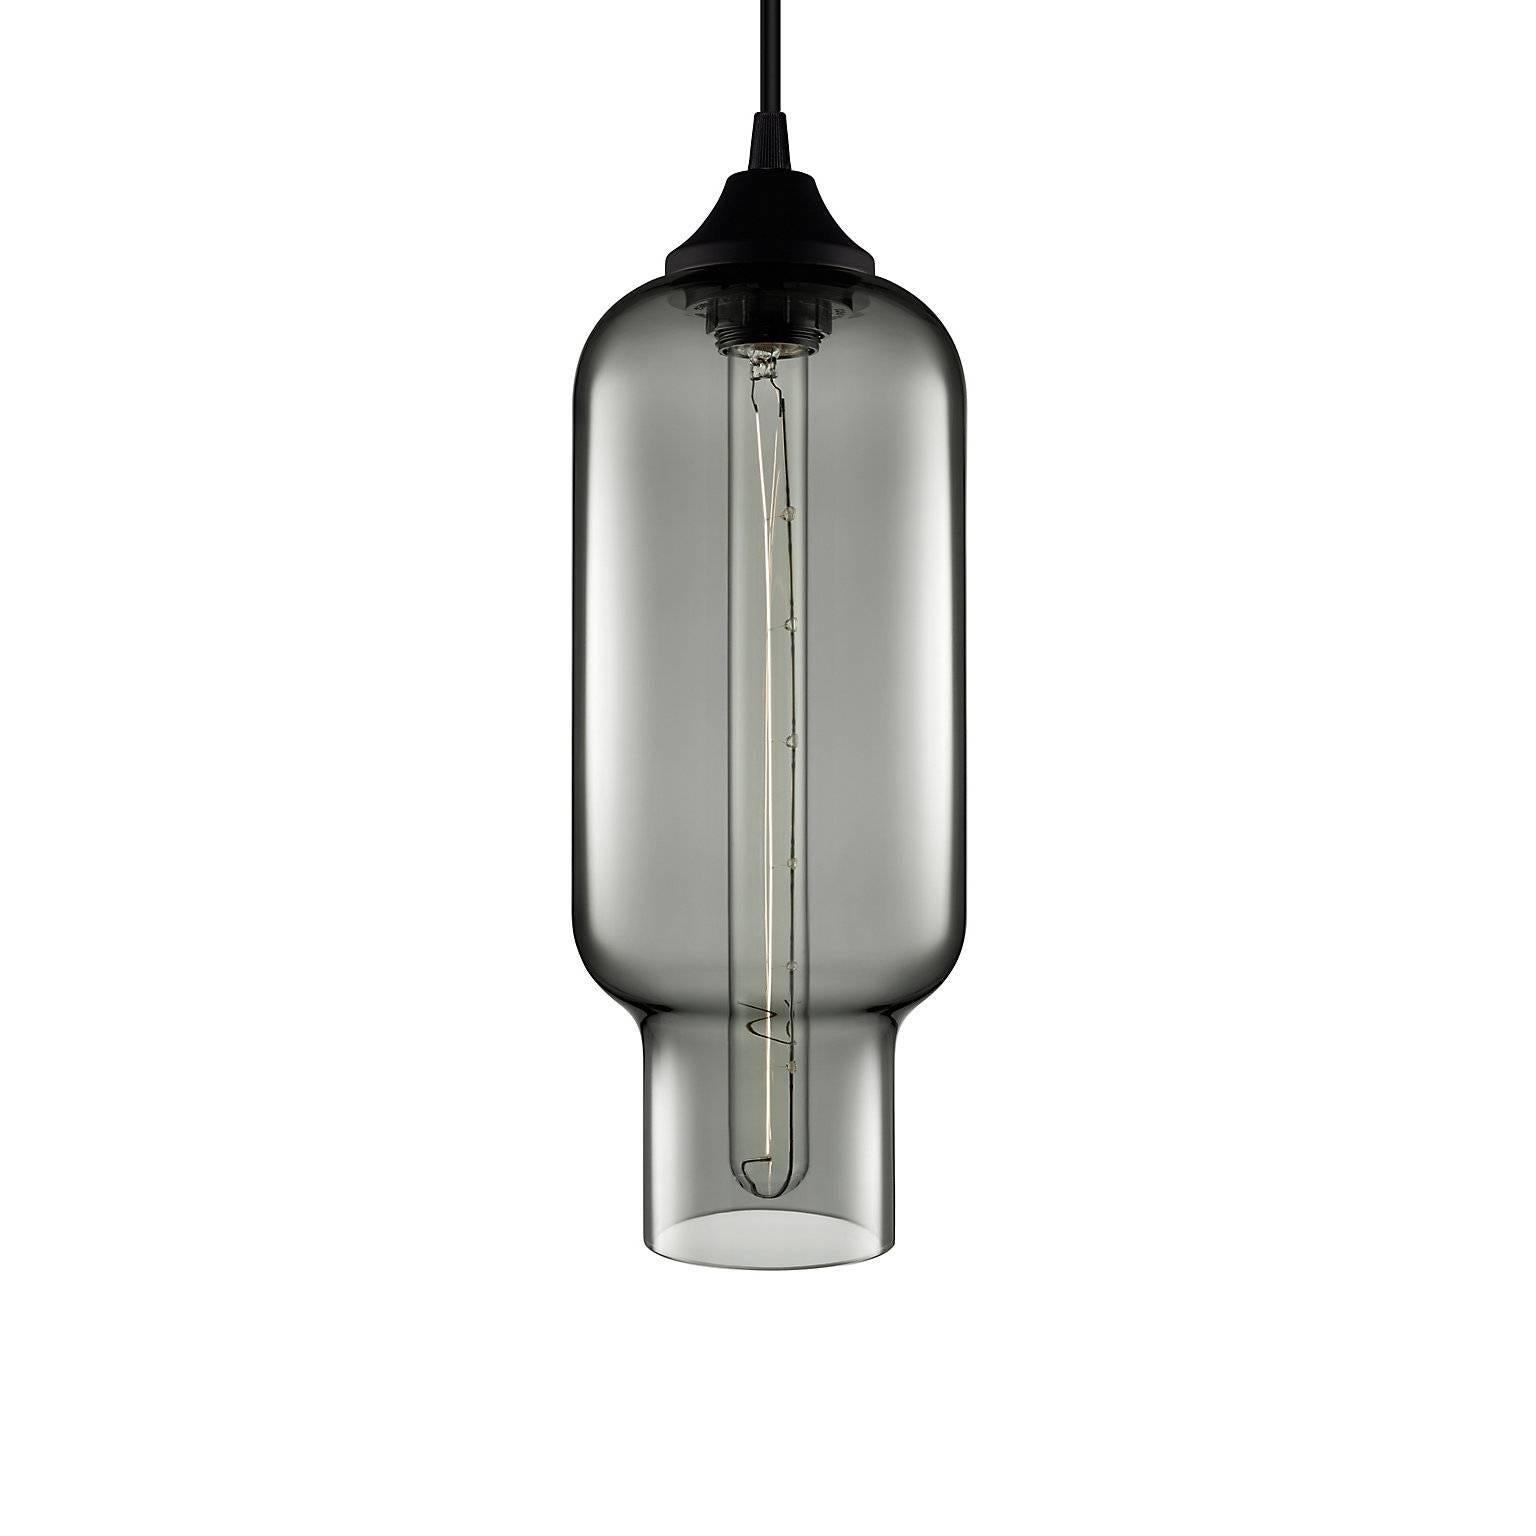 Pharos Amber Handblown Modern Glass Pendant Light, Made in the USA In New Condition For Sale In Beacon, NY